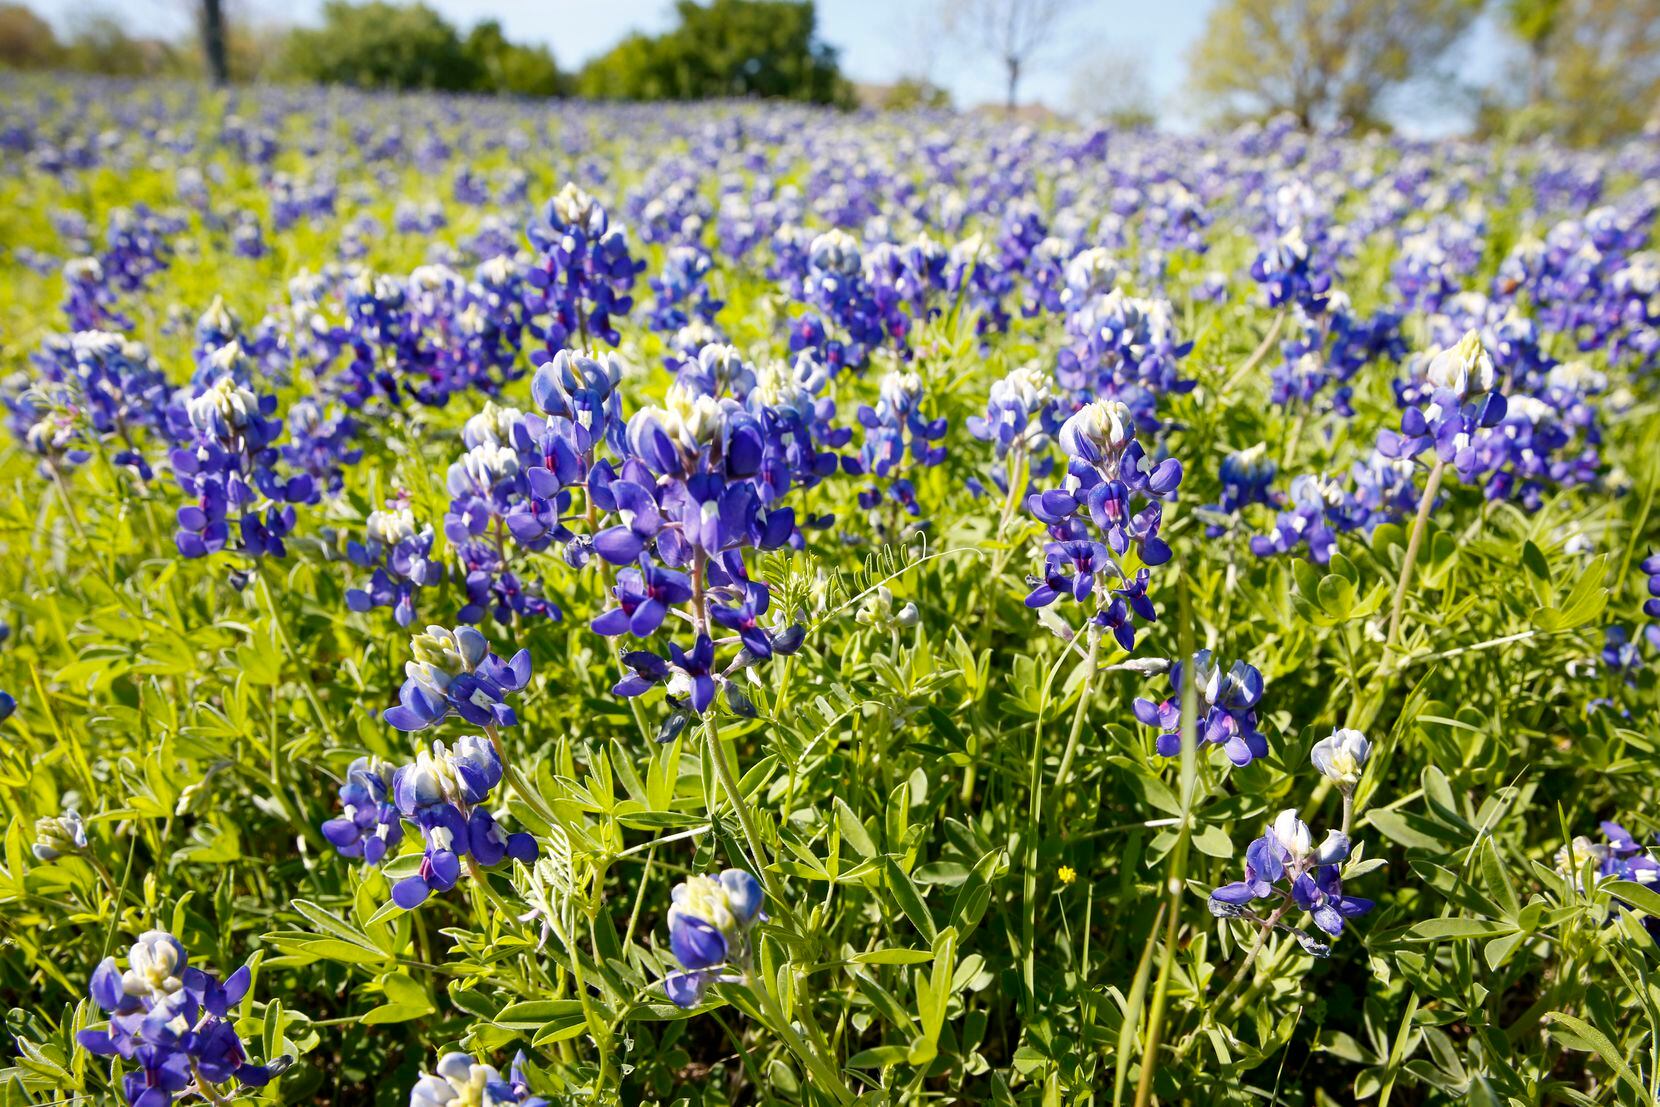 One of the best bluebonnets displays in Dallas-Fort Worth could be in ...